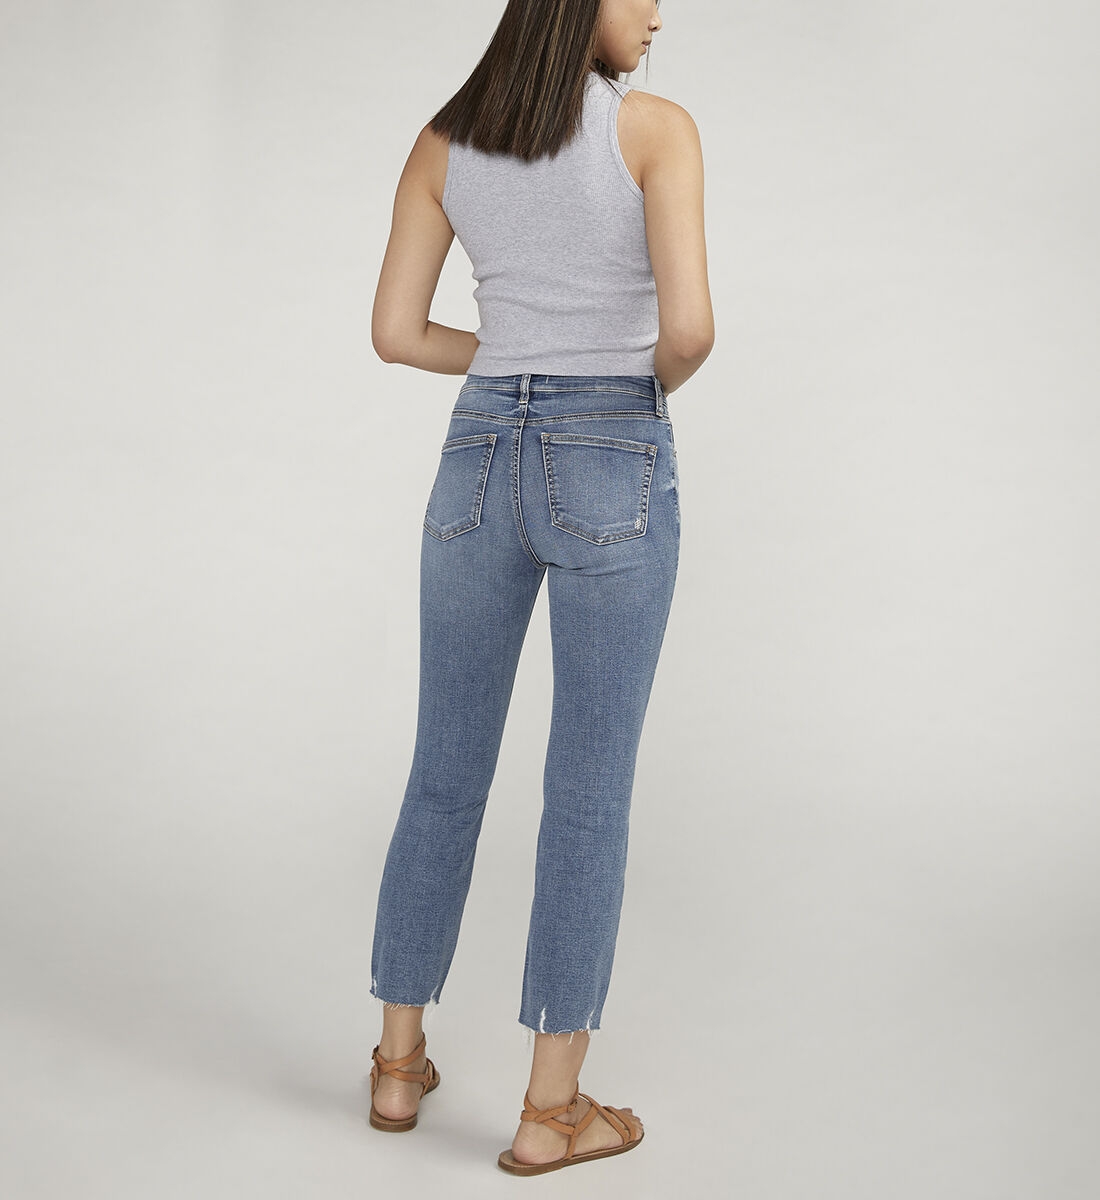 Buy Most Wanted Mid Rise Straight Leg Americana Jeans for USD 